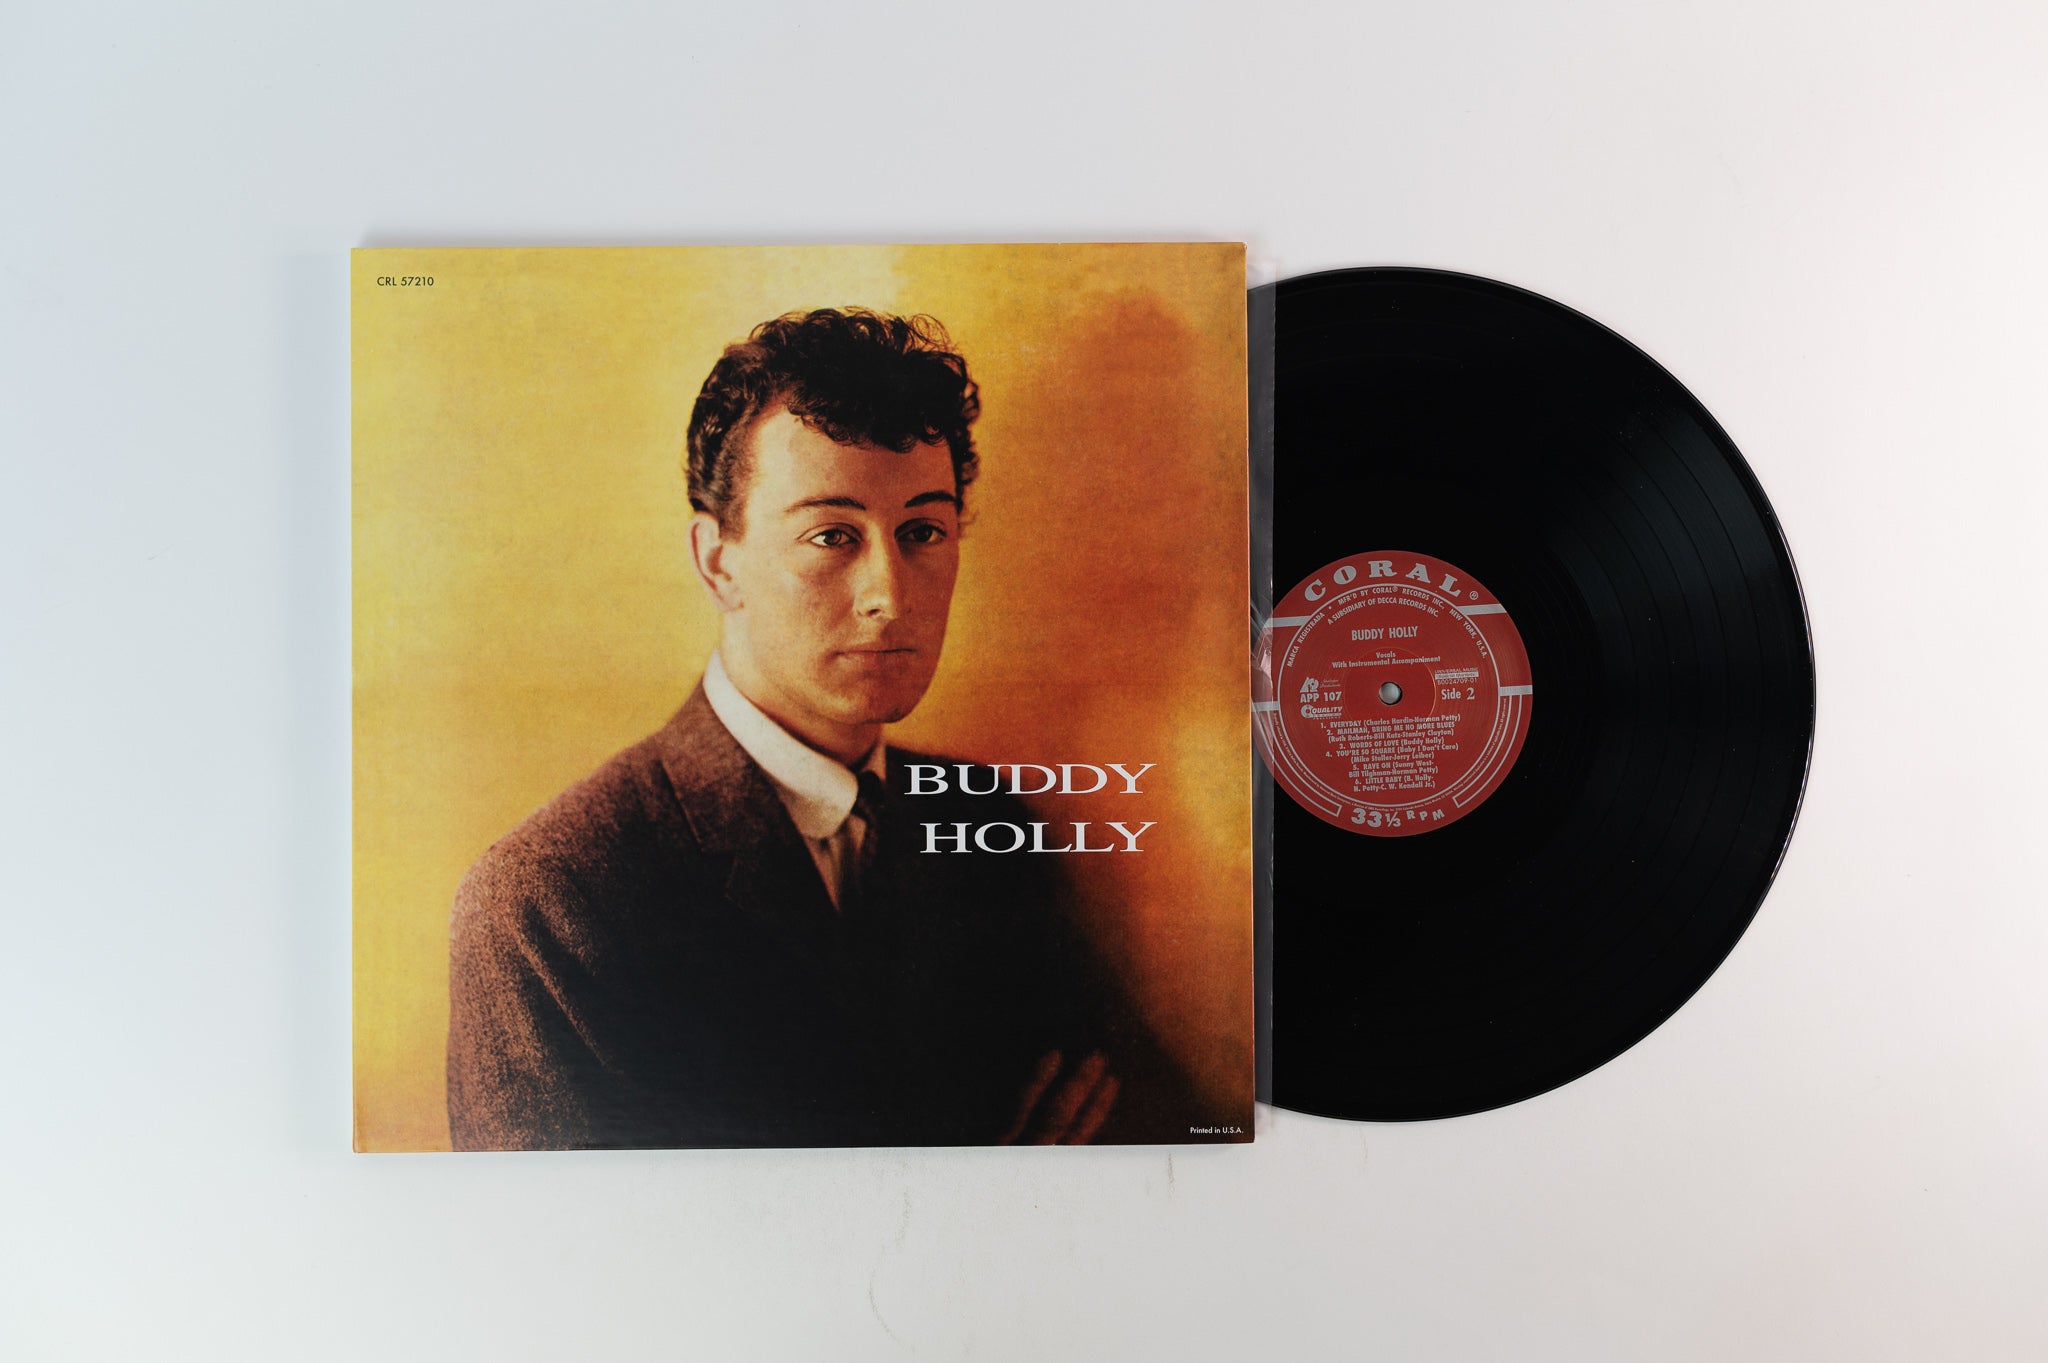 Buddy Holly - Buddy Holly on Coral Analog Productions 200 Gram Reissue